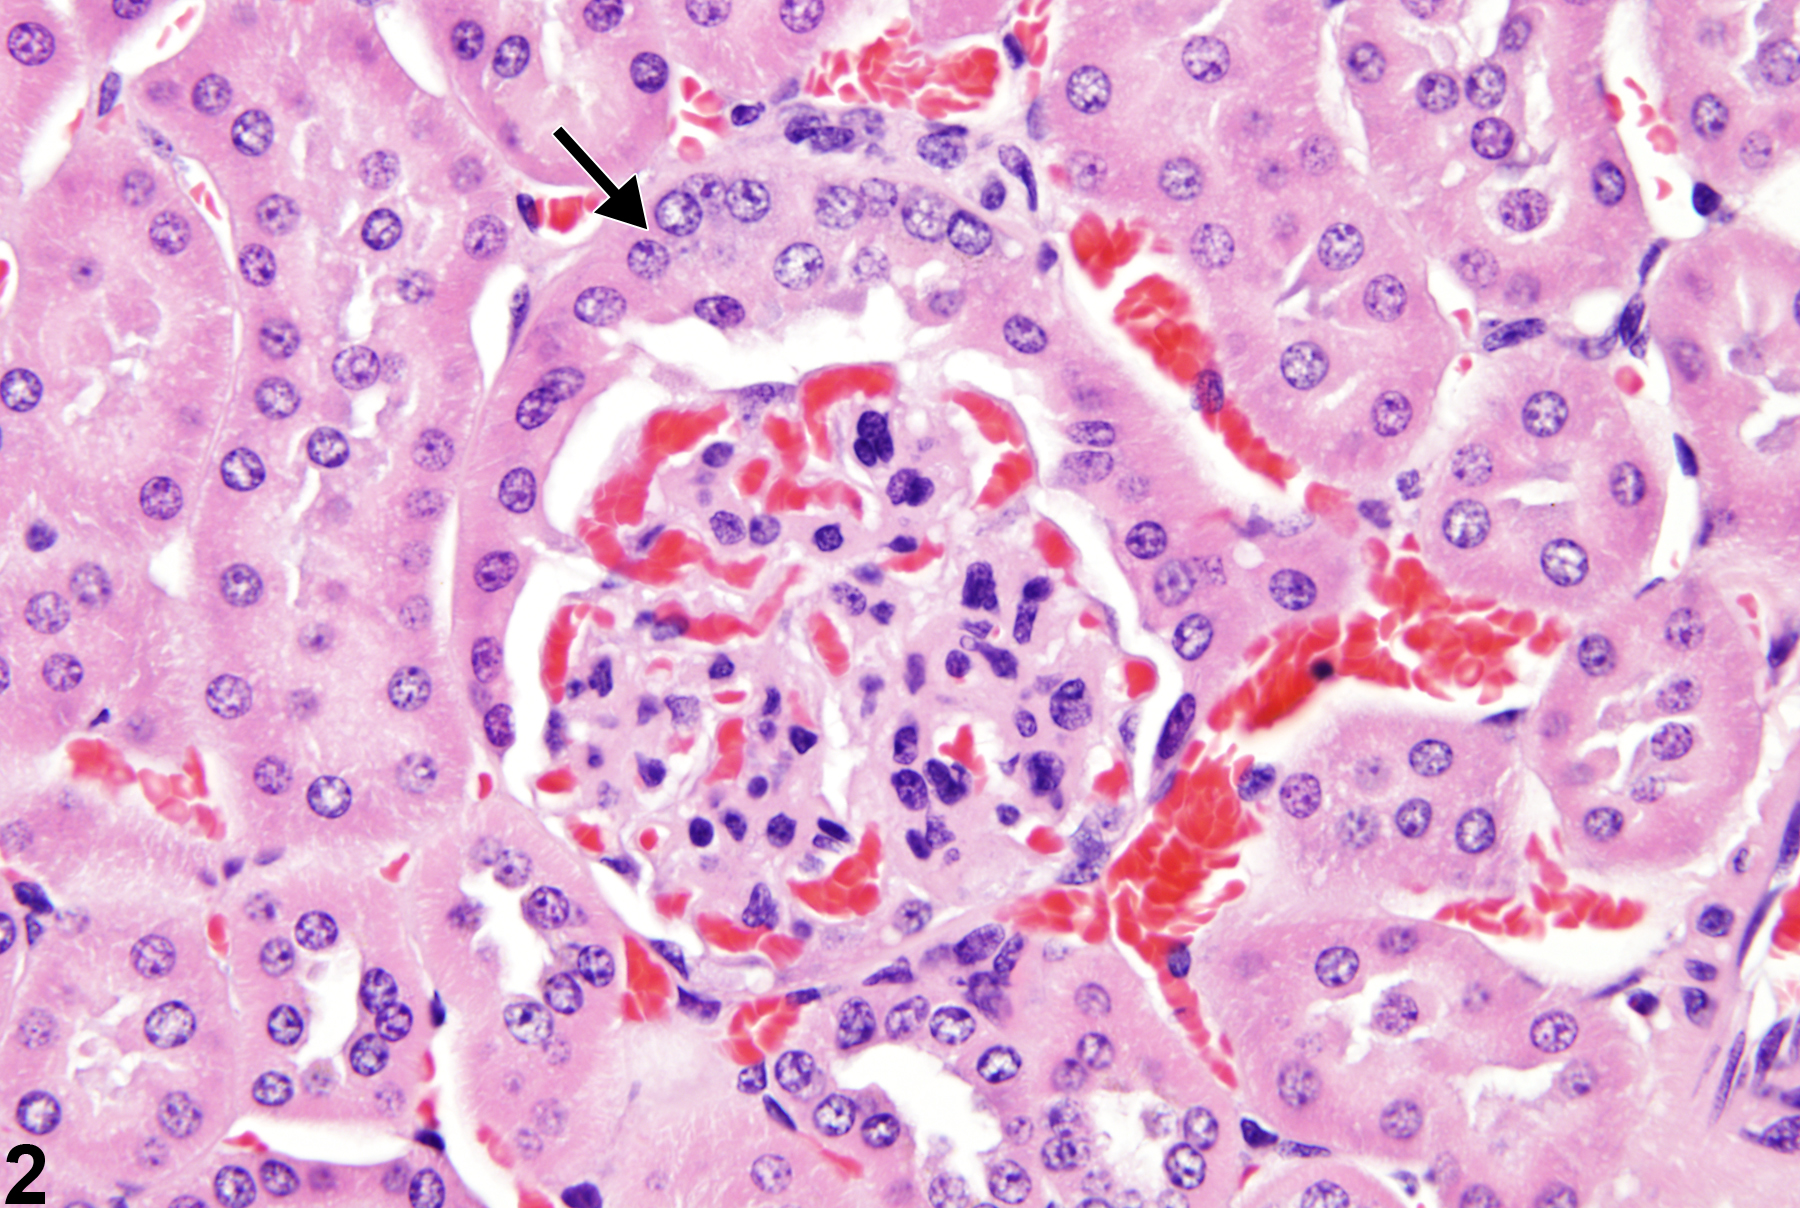 Image of glomerulus metaplasia in the kidney from a female B6C3F1 mouse in a chronic study